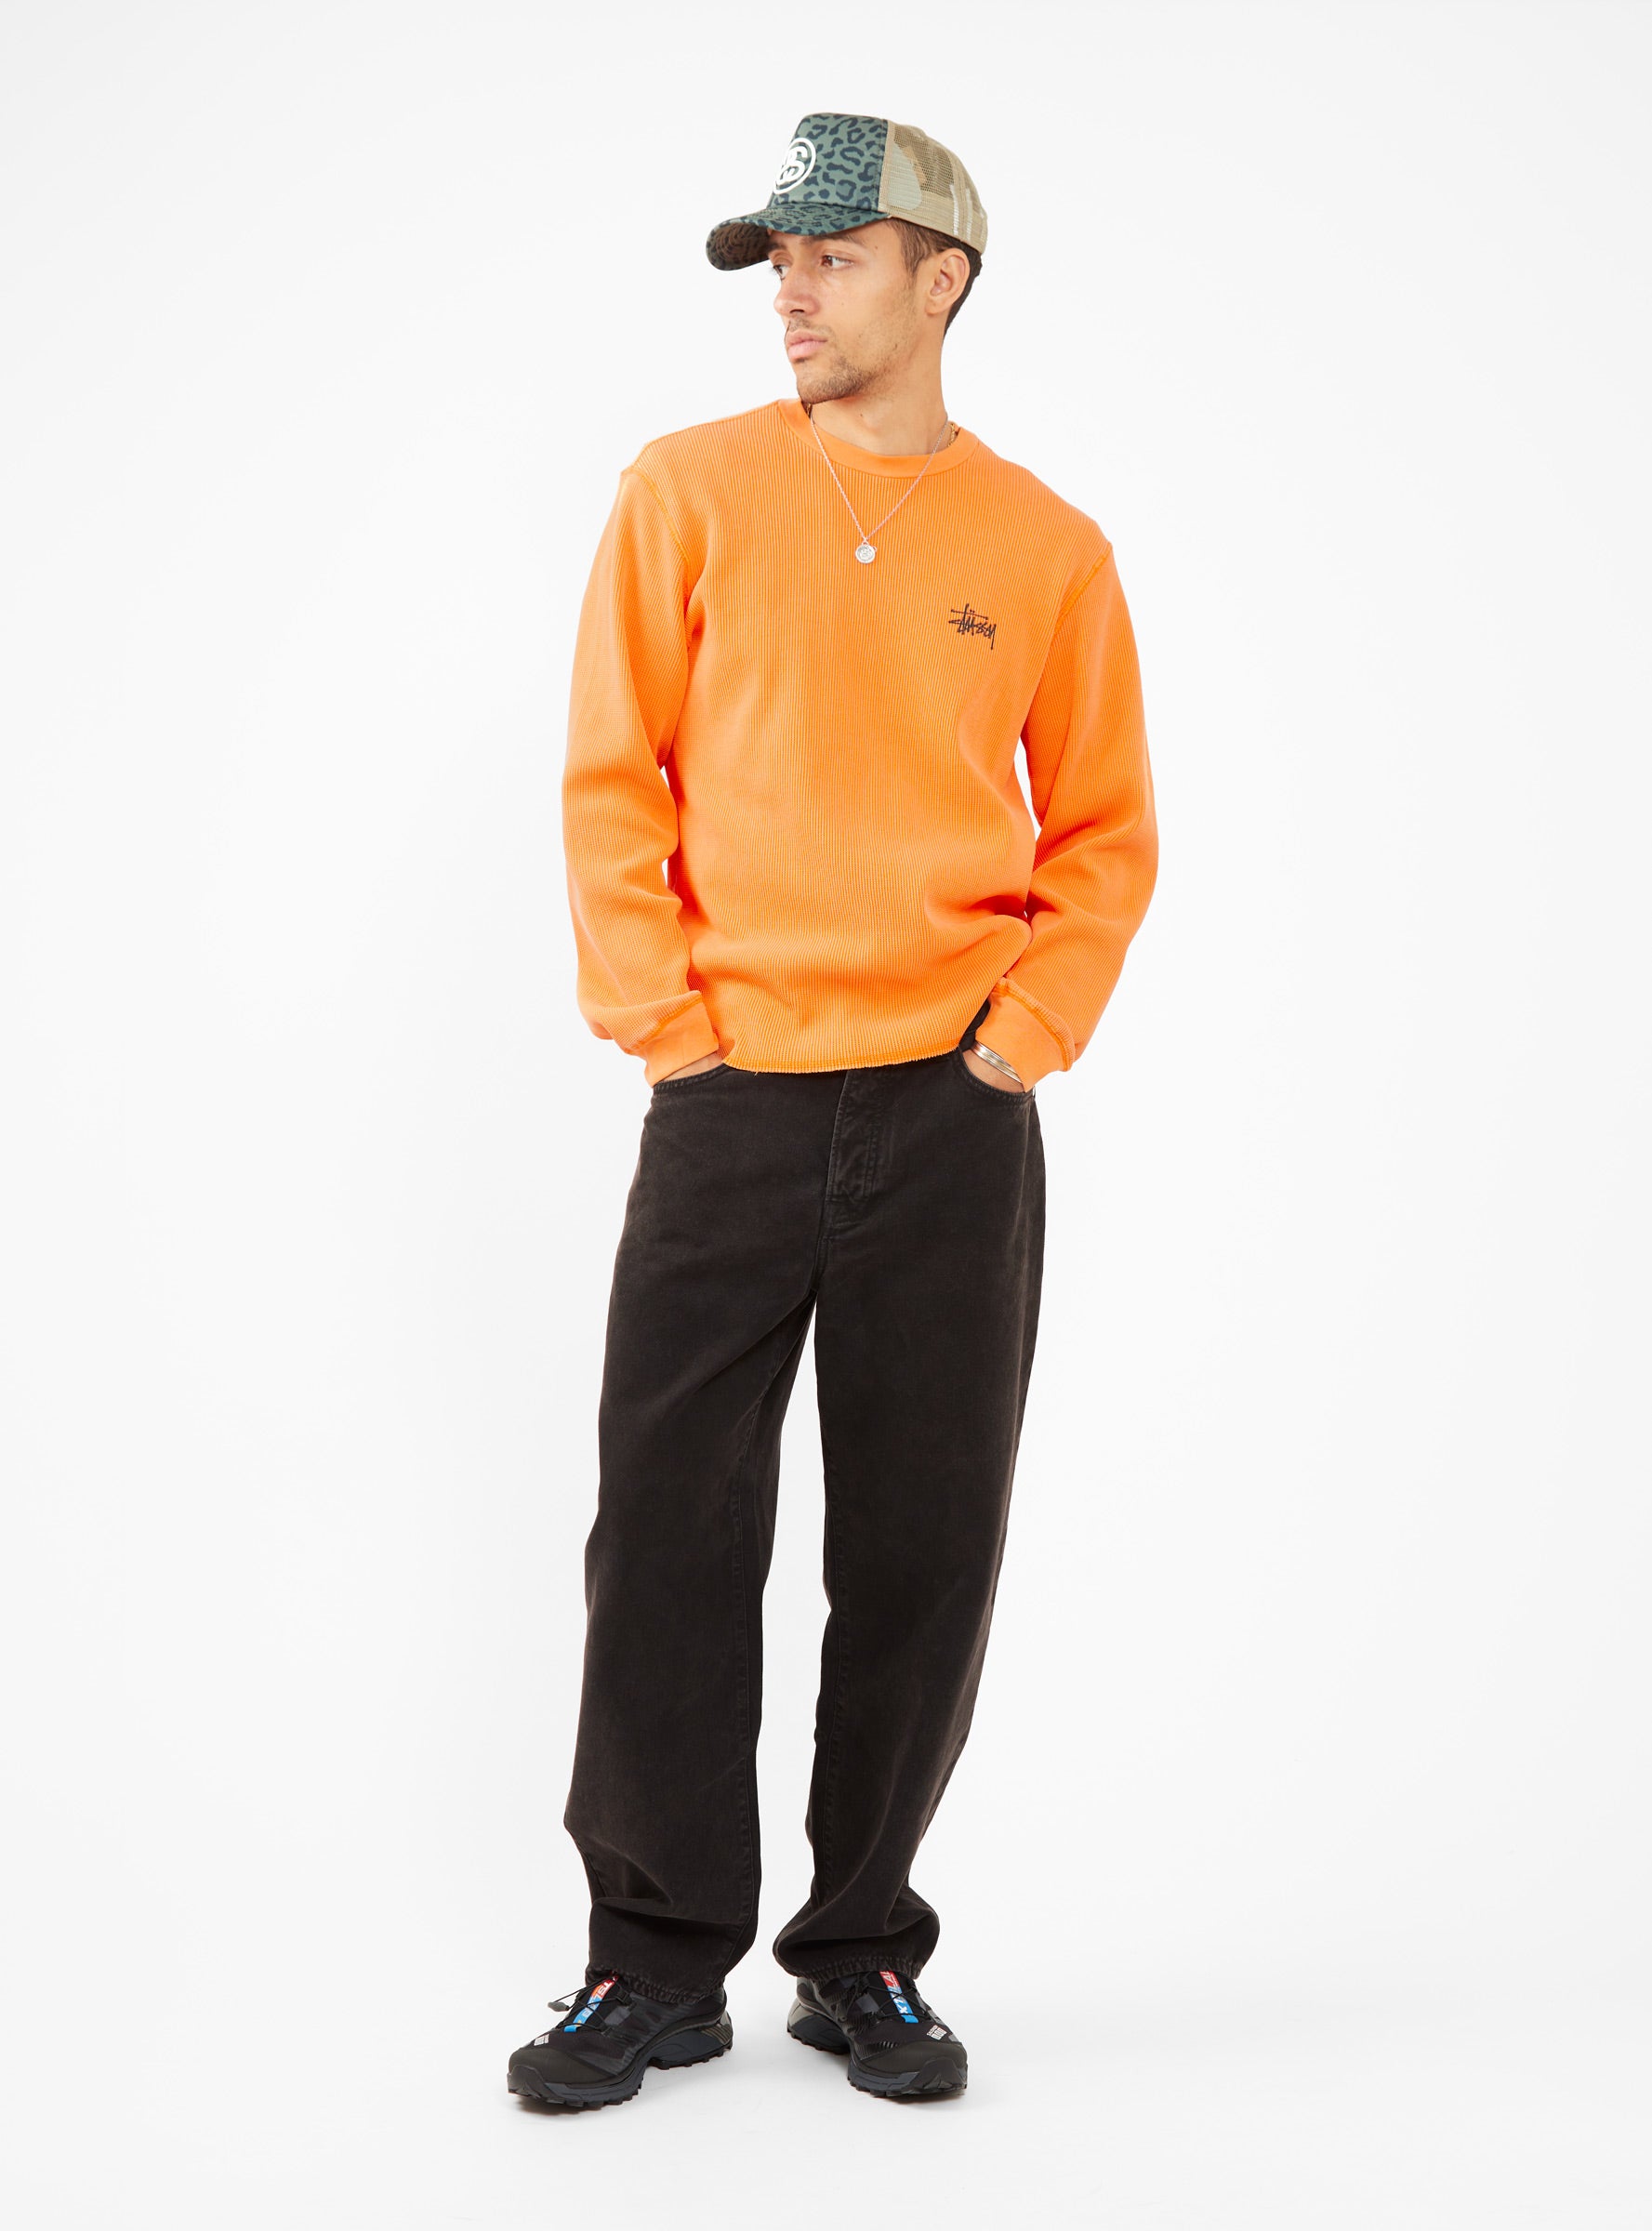 Basic Stock Thermal Top Orange by Stüssy | Couverture & The Garbstore